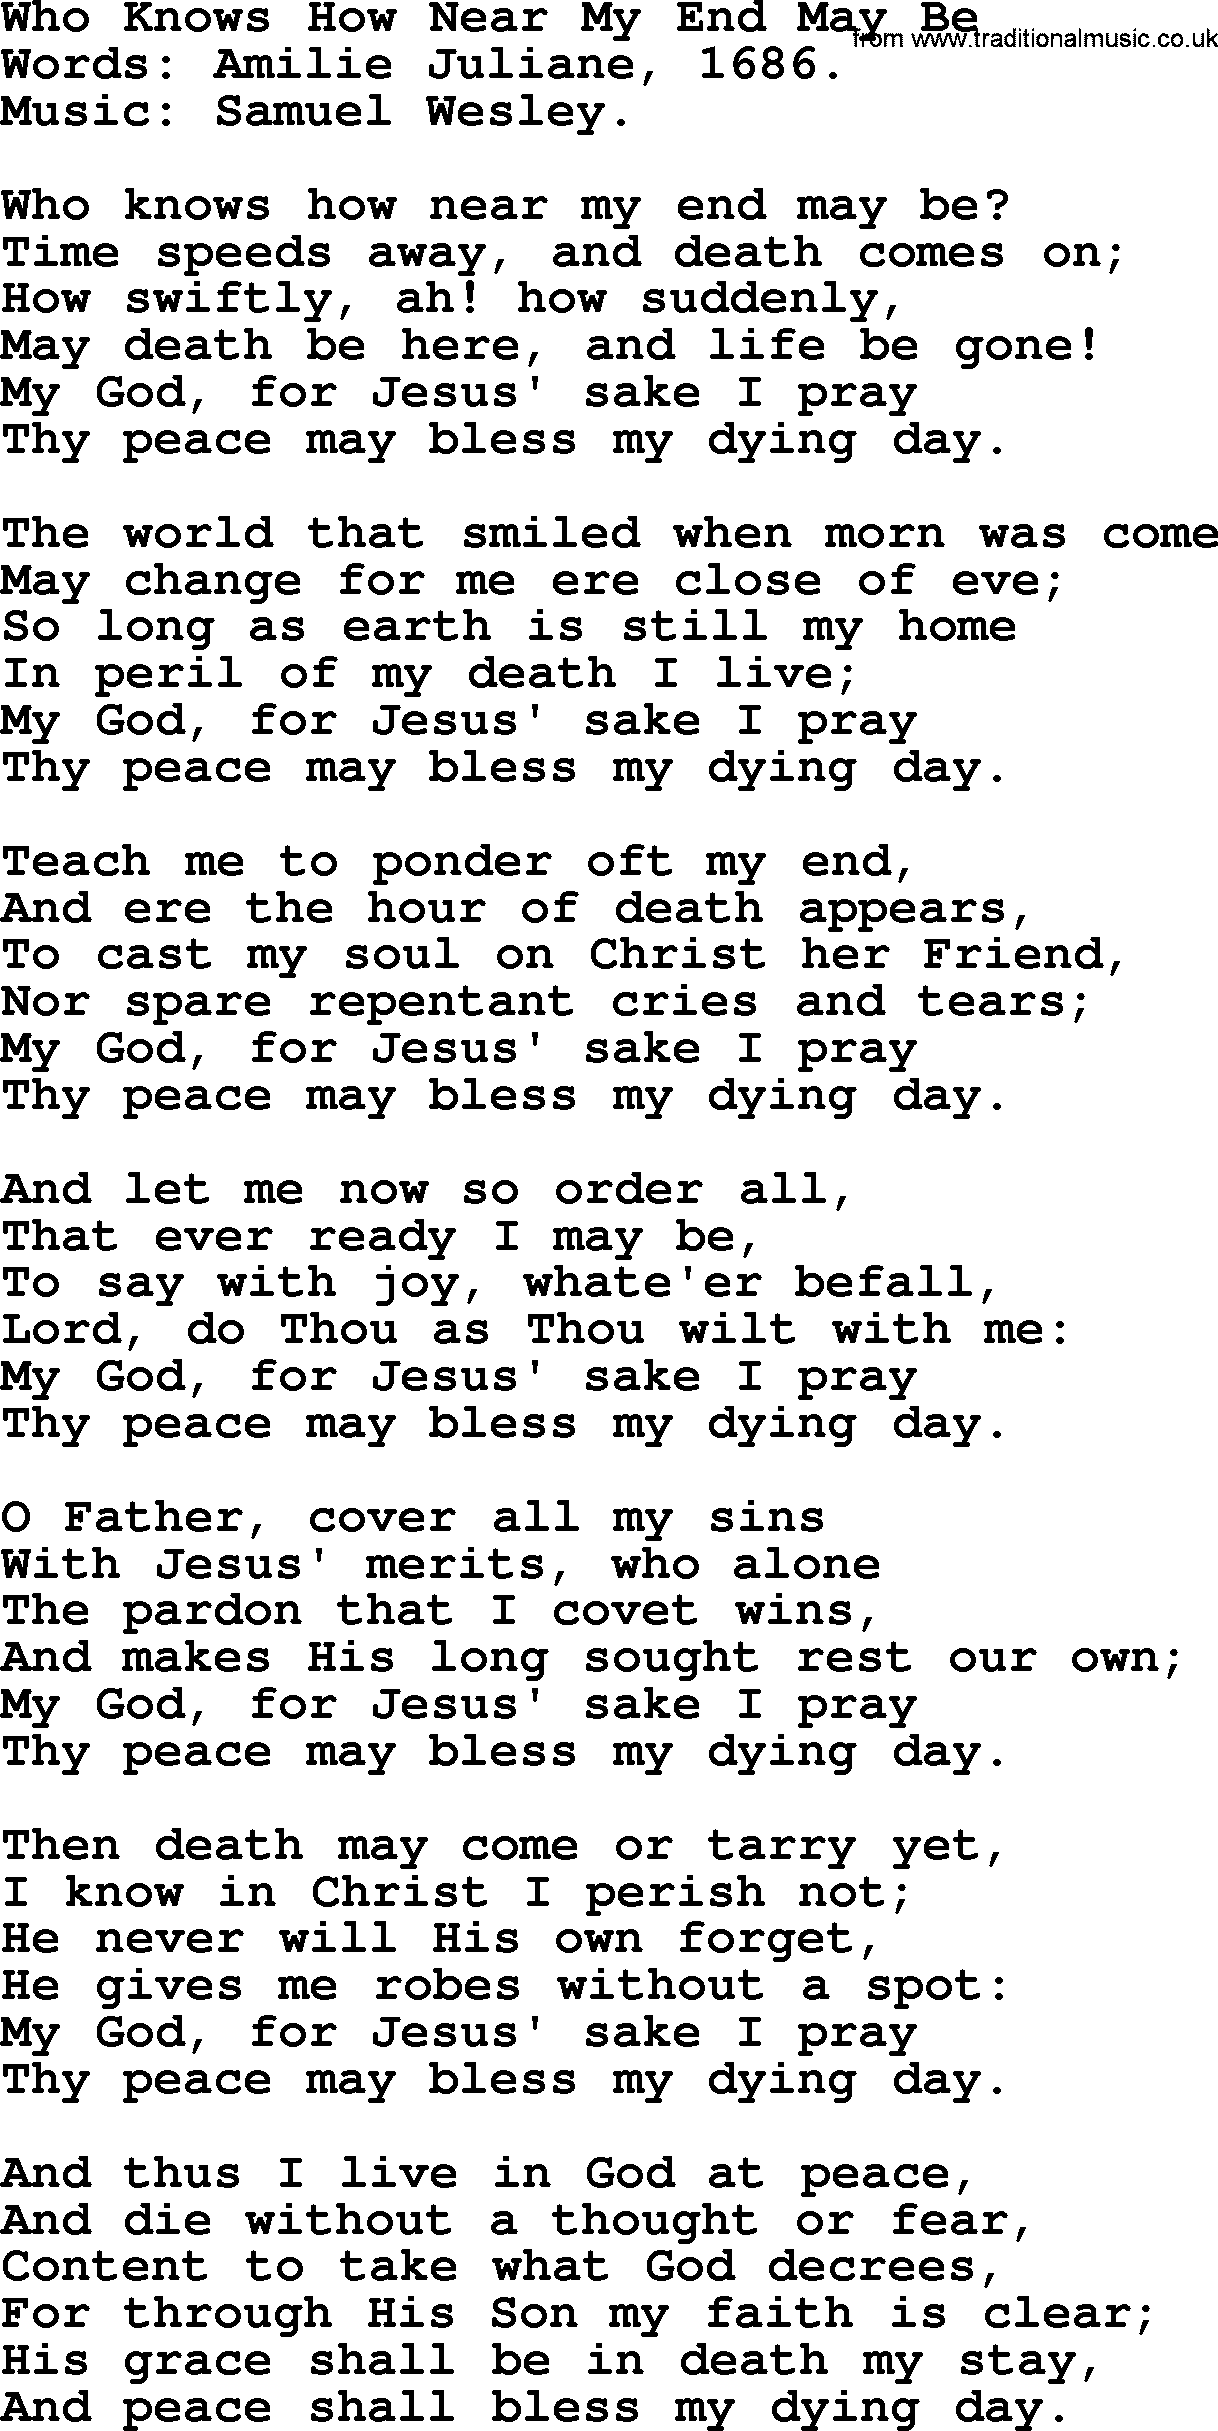 100+ Christian Funeral Hymns collection, Hymn: Who Knows How Near My End May Be, lyrics and PDF